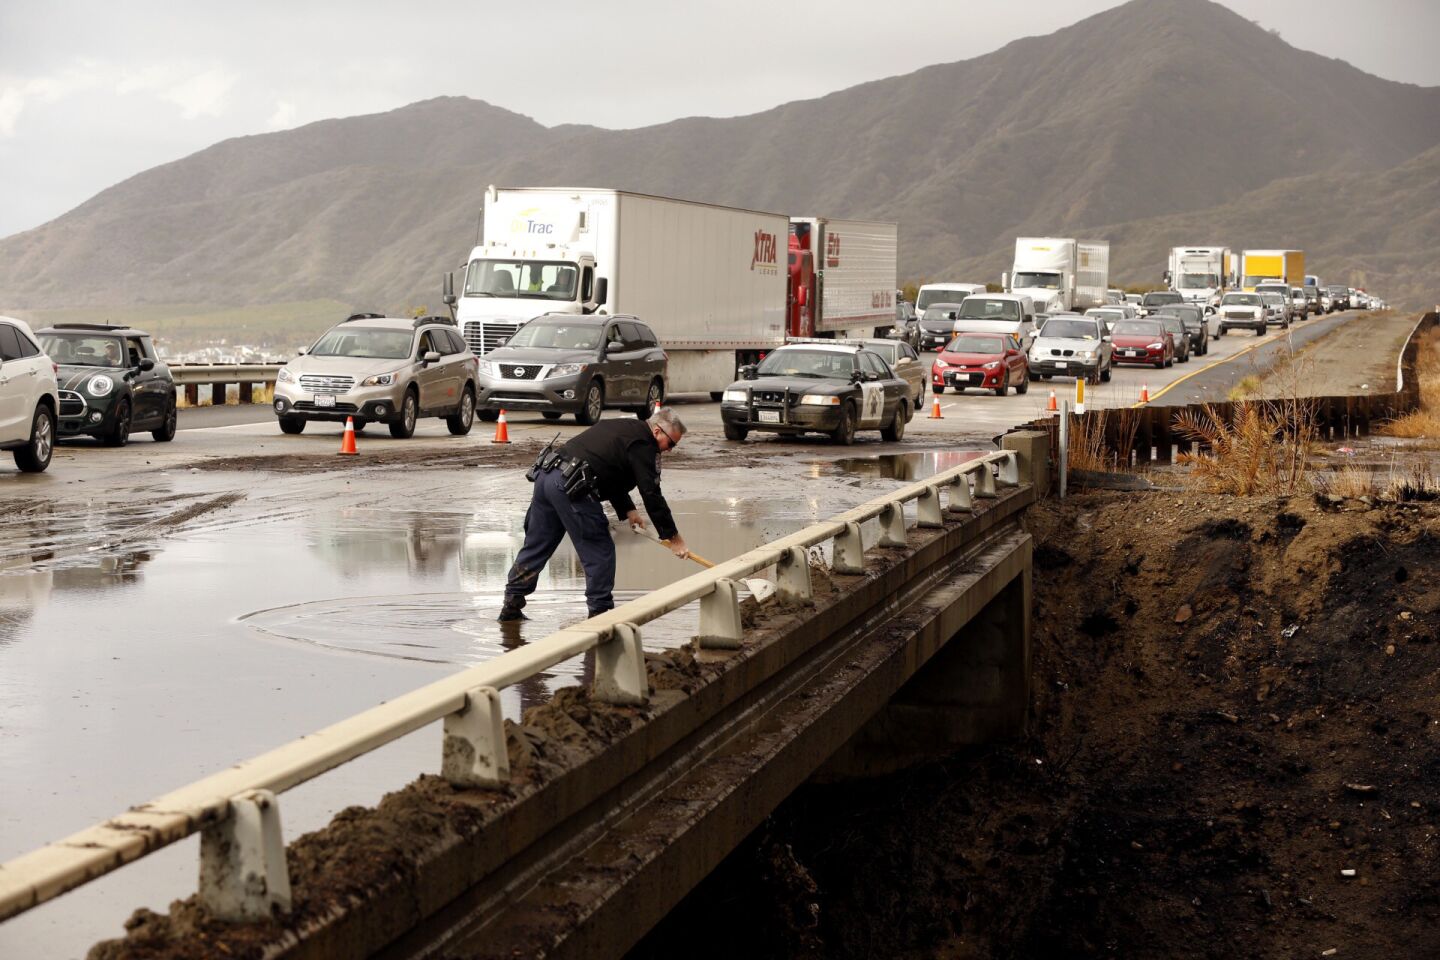 CHP Sgt. Joe Davy uses a shovel to try to clear a drain on the southbound lanes of the 101 Freeway of mud from the recent Solimar Fire runoff that flowed over the freeway, closing lanes.